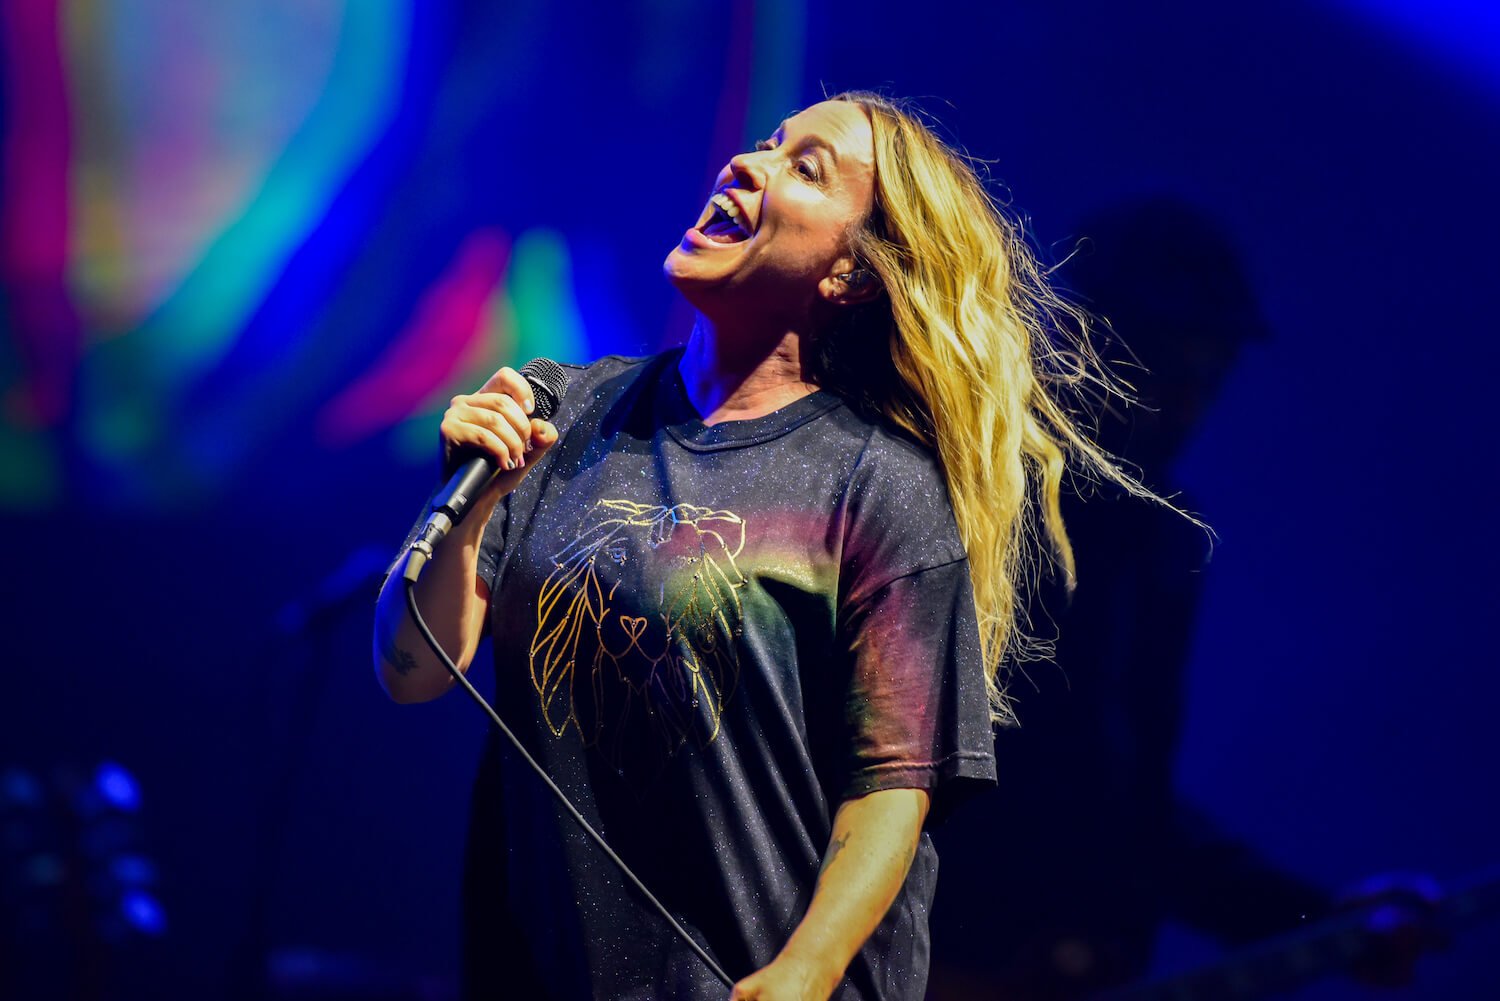 Alanis Morissette singing into a microphone on stage in a T-shirt against a blue background. Alanis Morissette is a guest judge on 'American Idol' 2023.